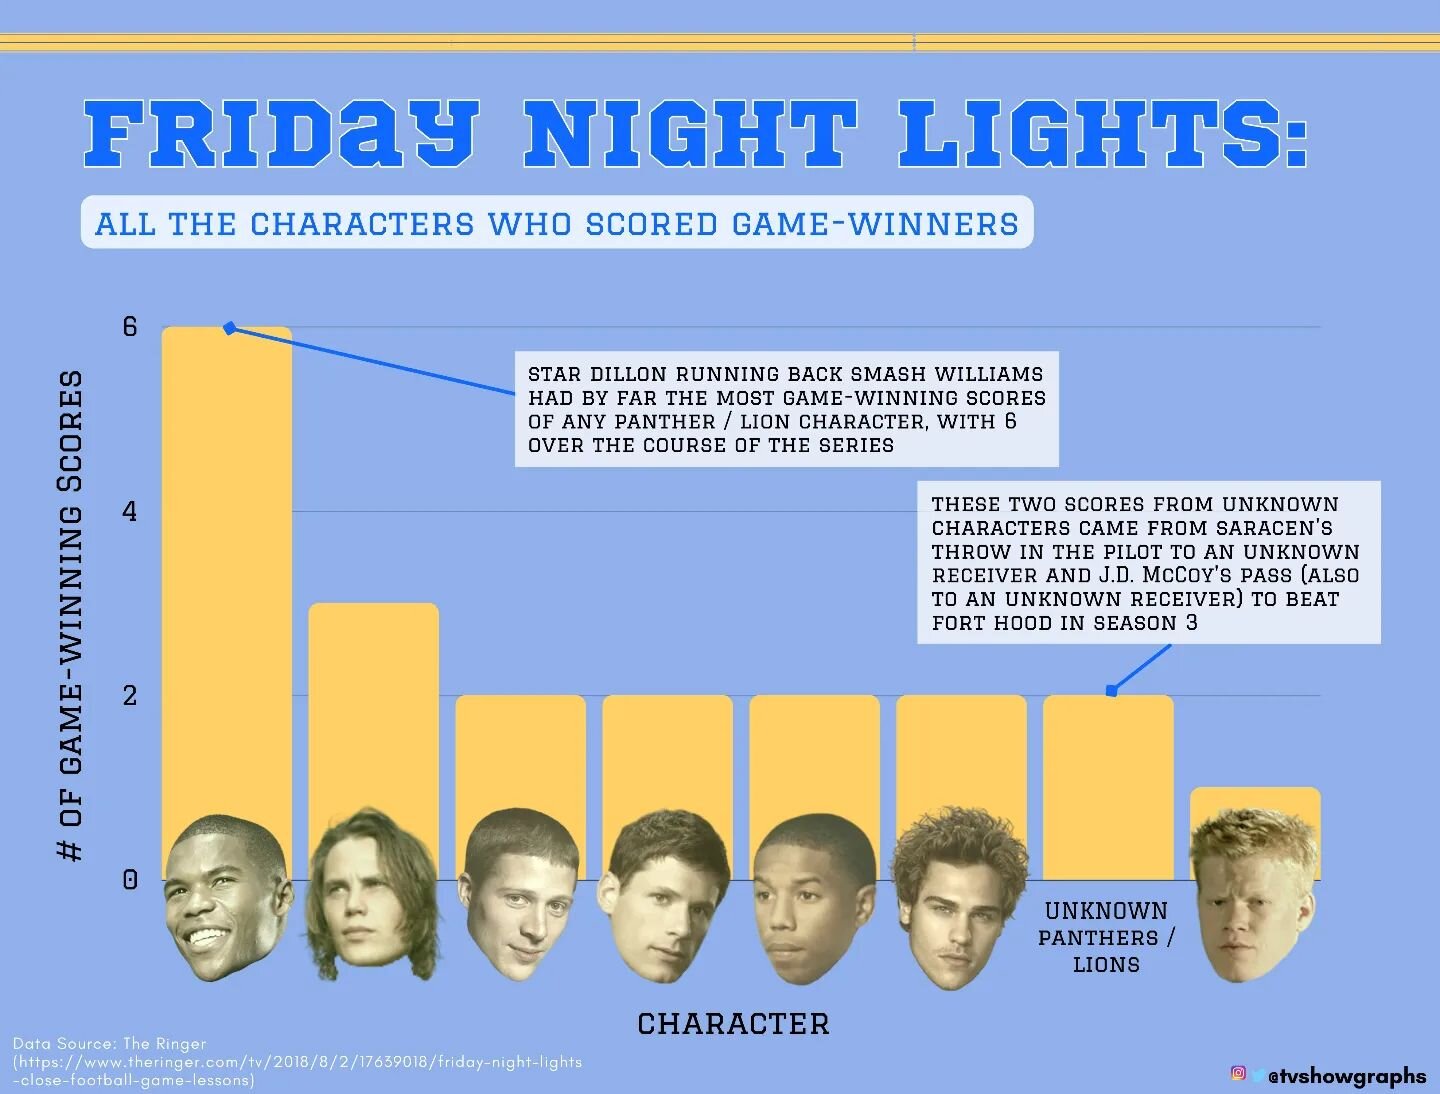 In honor of the latest episode of @inmyqueuepod (which I had a blast joining for a discussion of all things Friday Night Lights!), I decided I was was overdue for another FNL graph!

There's a ton of fun game-related data around FNL to dive into, but